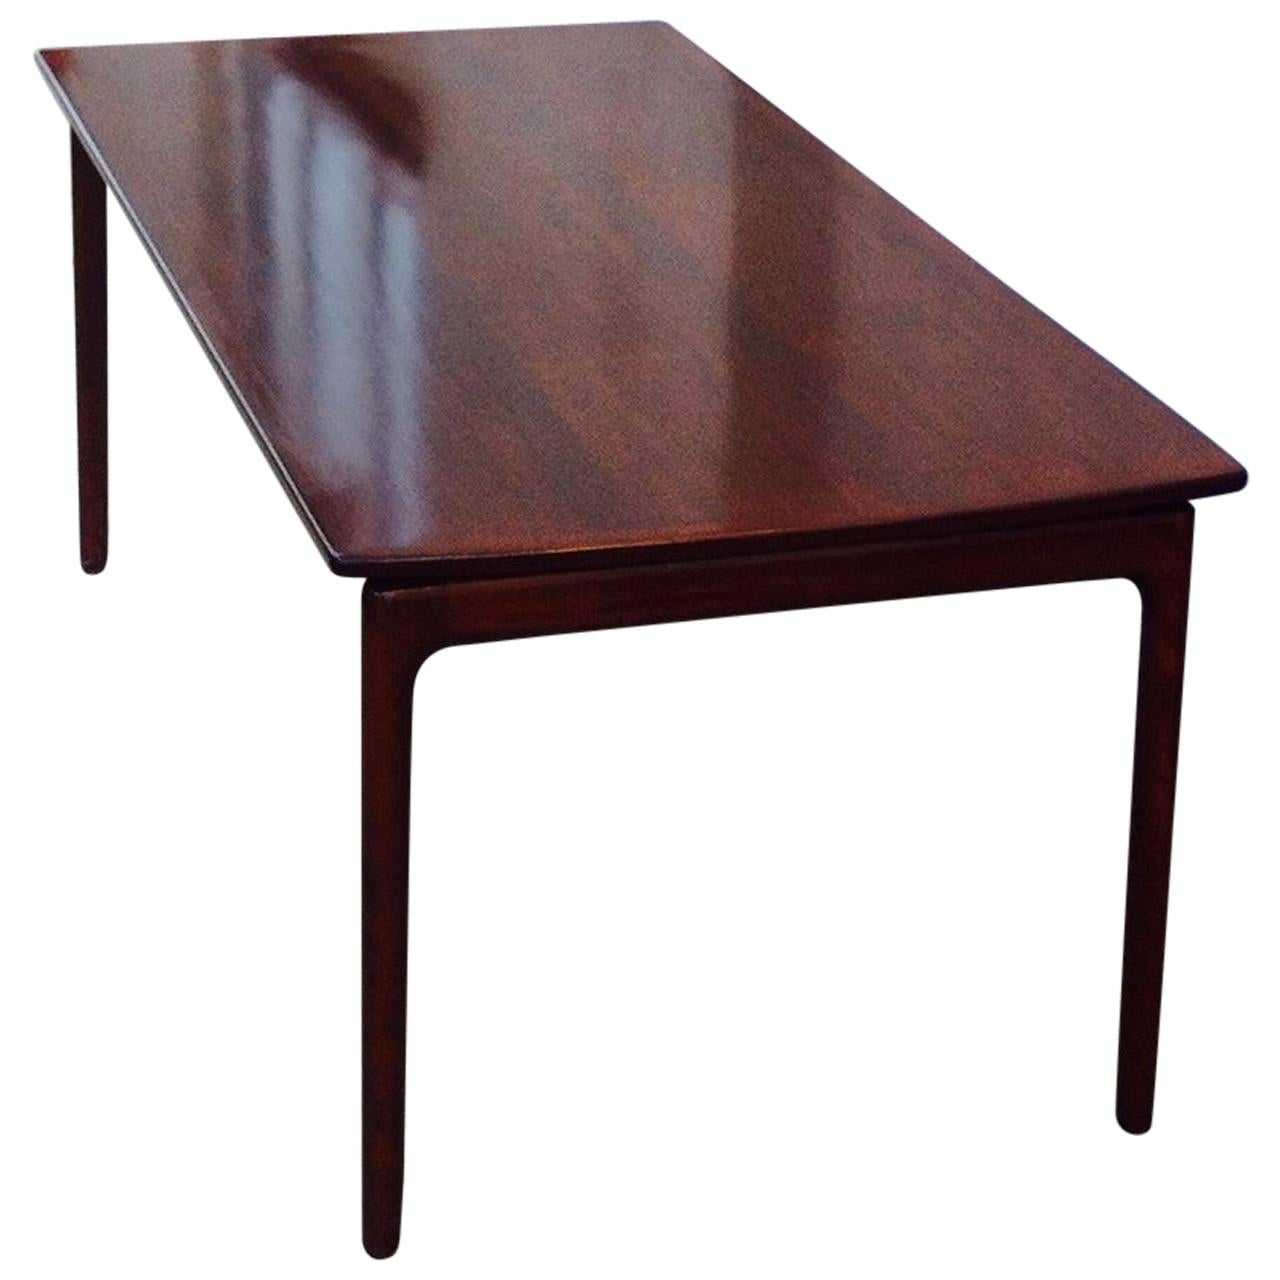 Danish Modern Mahogany Coffee Table with Floating Tabletop by Ole Wanscher 1960s For Sale